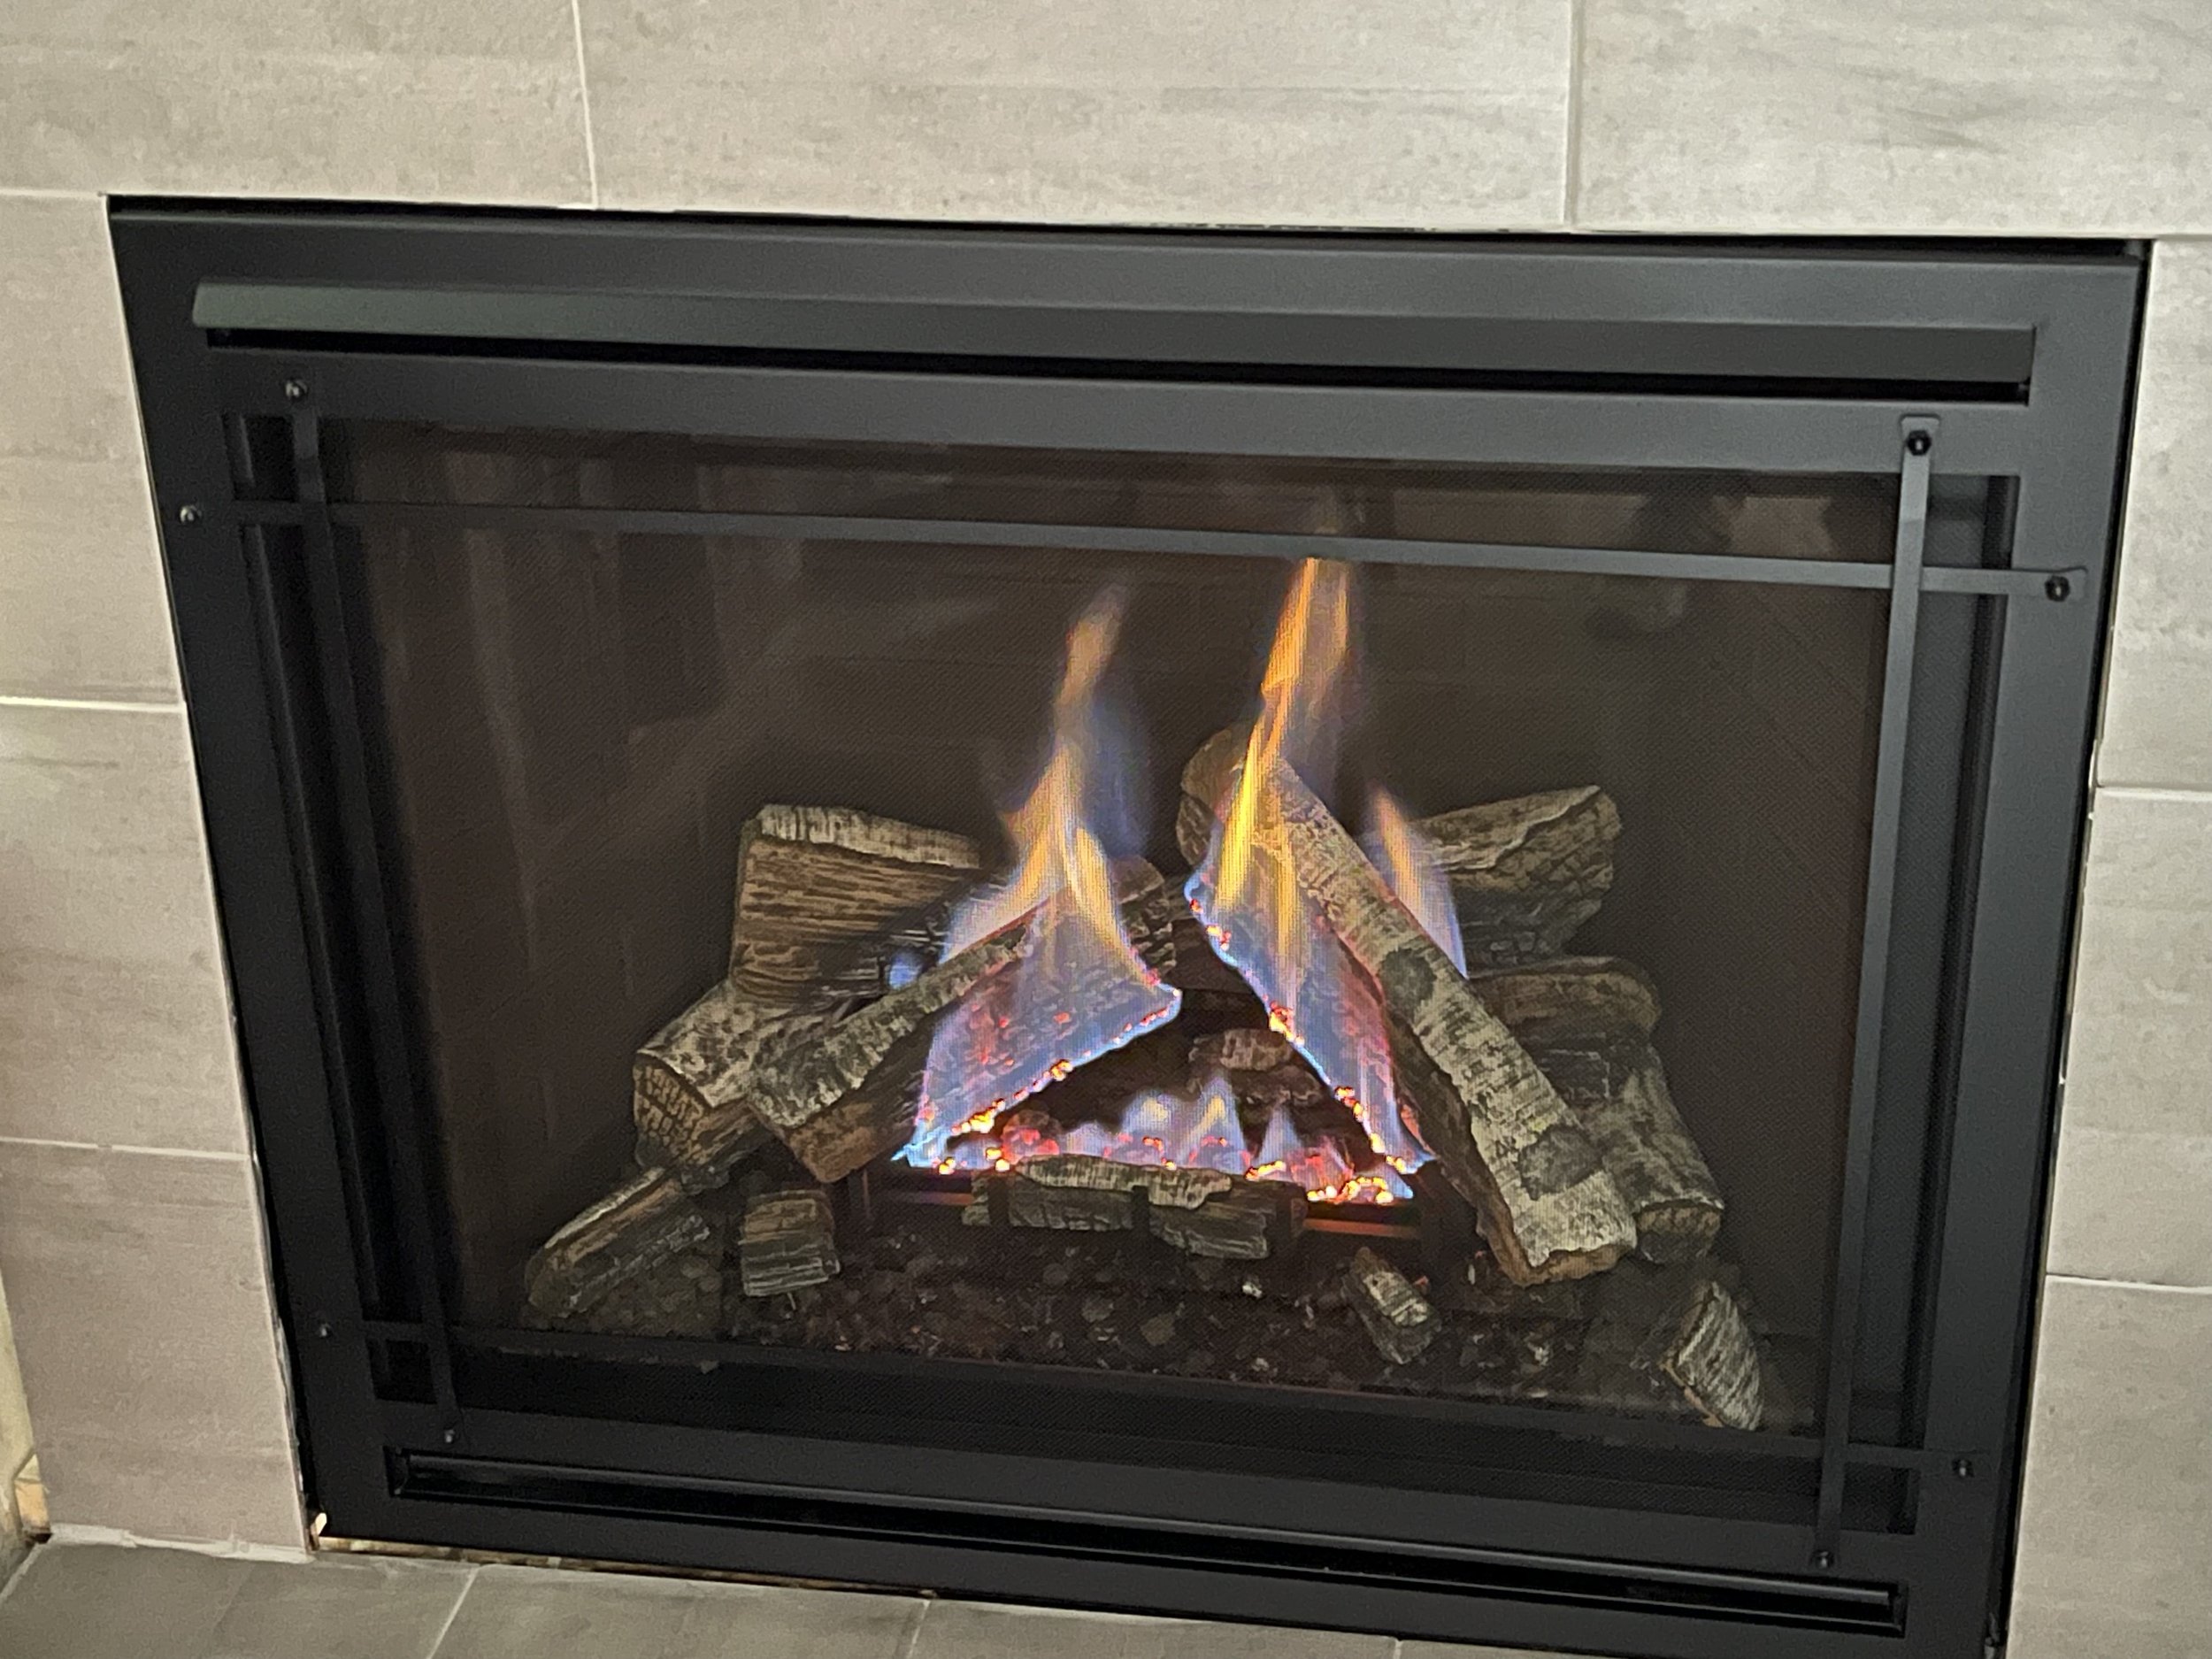 Models By Kozy Heat We Can Order at Grizzly Fireplace